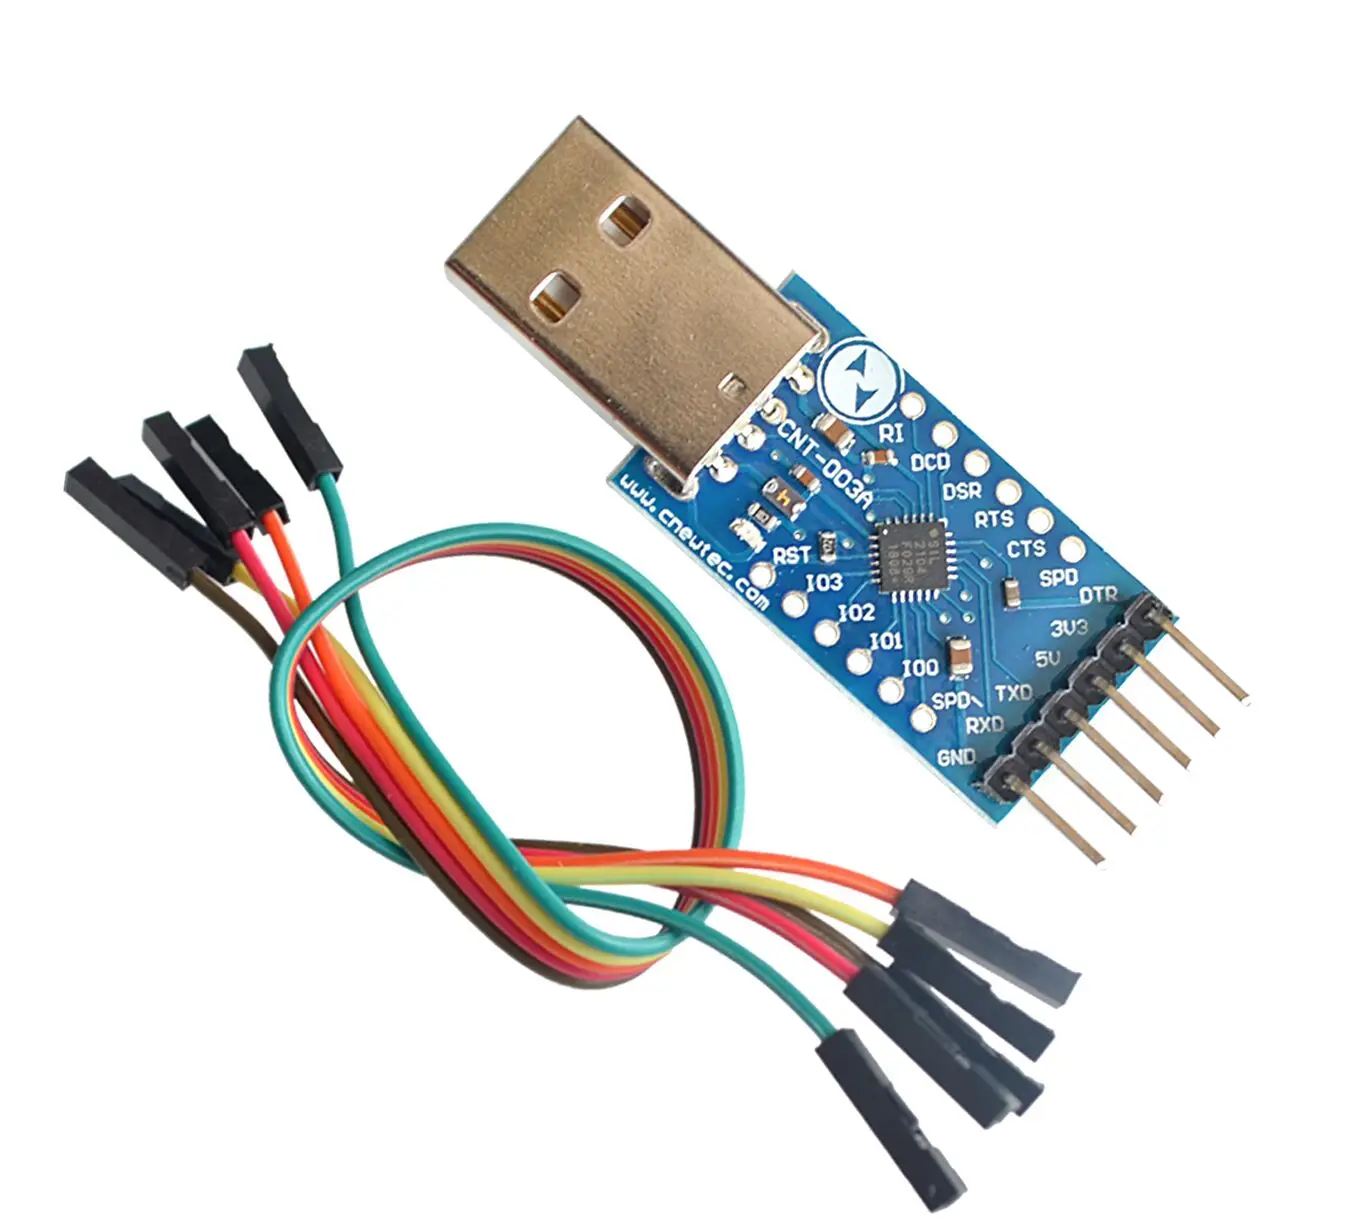 

USB 2.0 to TTL UART 6PIN Module Serial Converter CP2104 STC PRGMR Replace CP2102 With Dupont Cables DIY